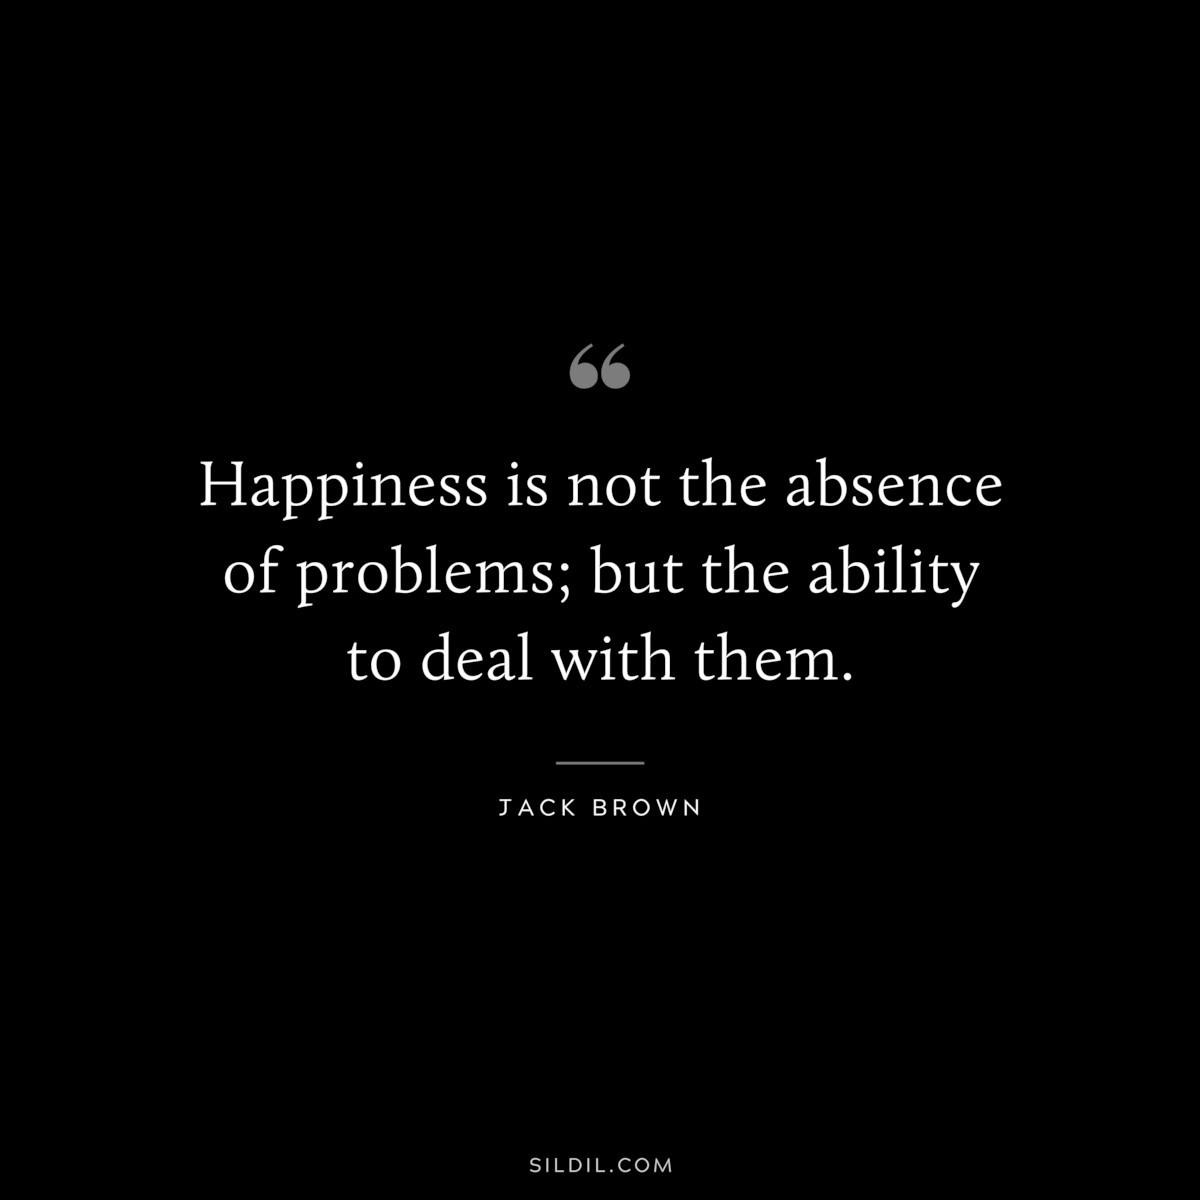 Happiness is not the absence of problems; but the ability to deal with them. ― Jack Brown